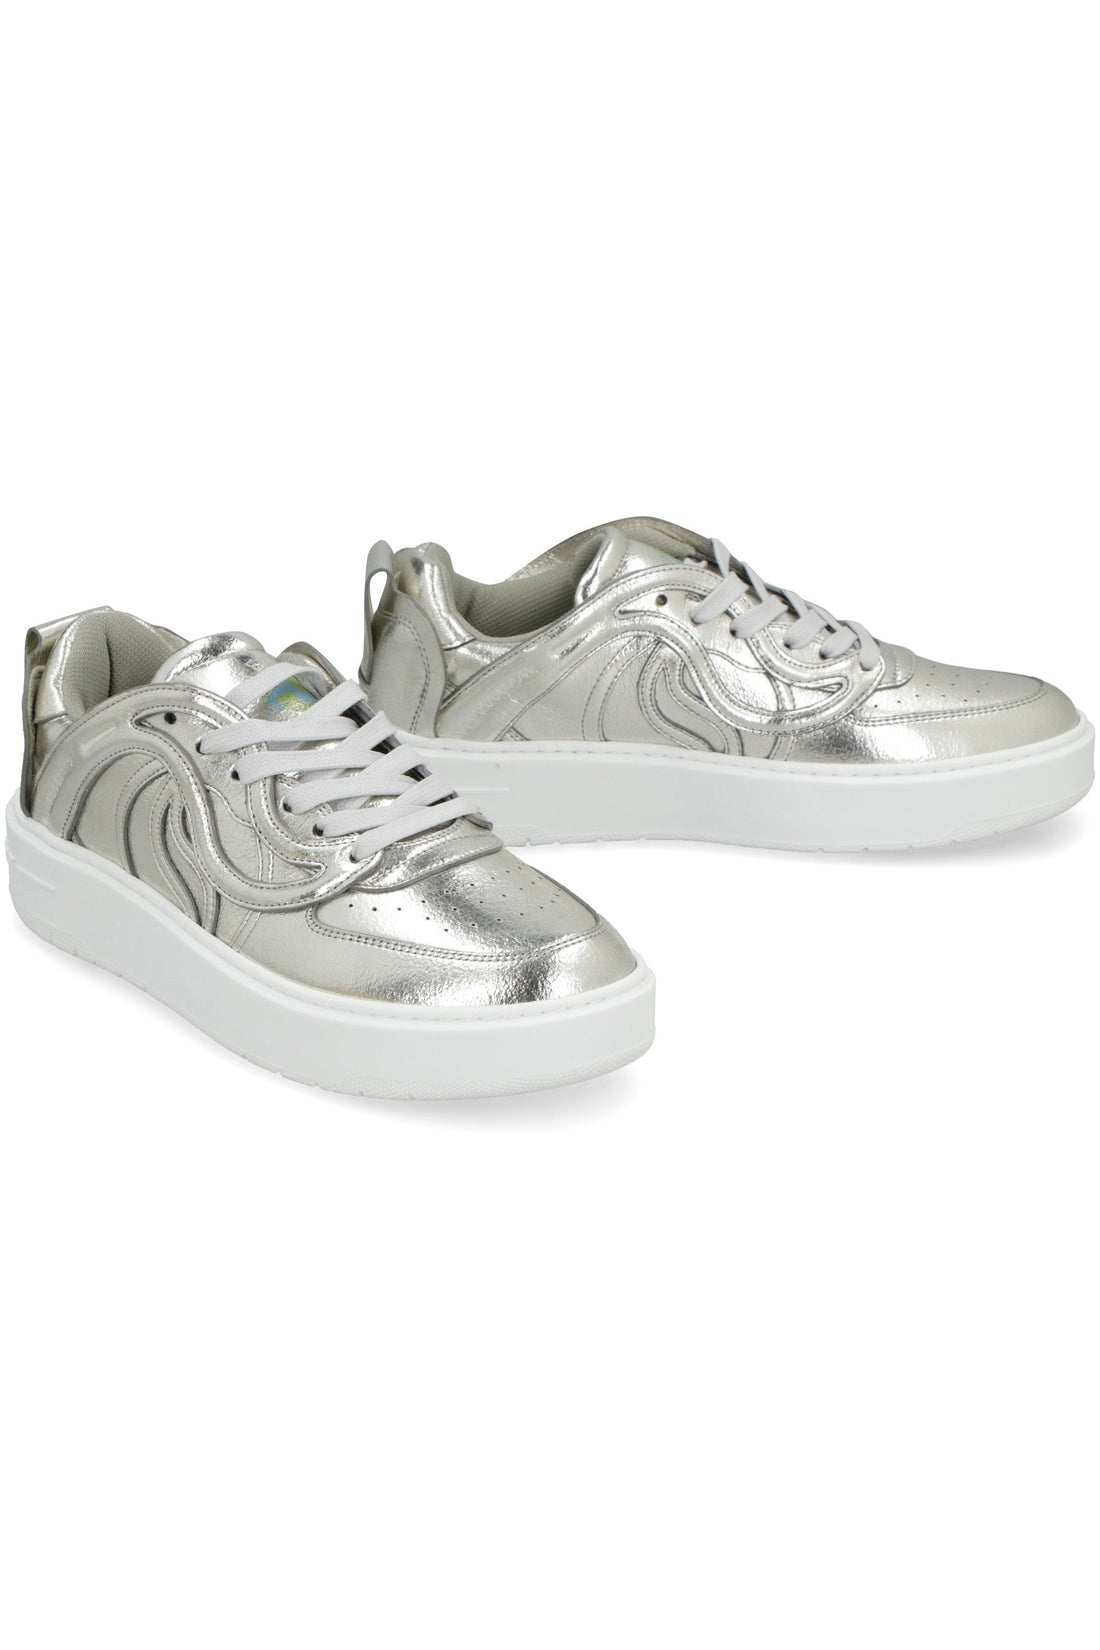 Stella McCartney-OUTLET-SALE-S Wave 1 low-top sneakers-ARCHIVIST